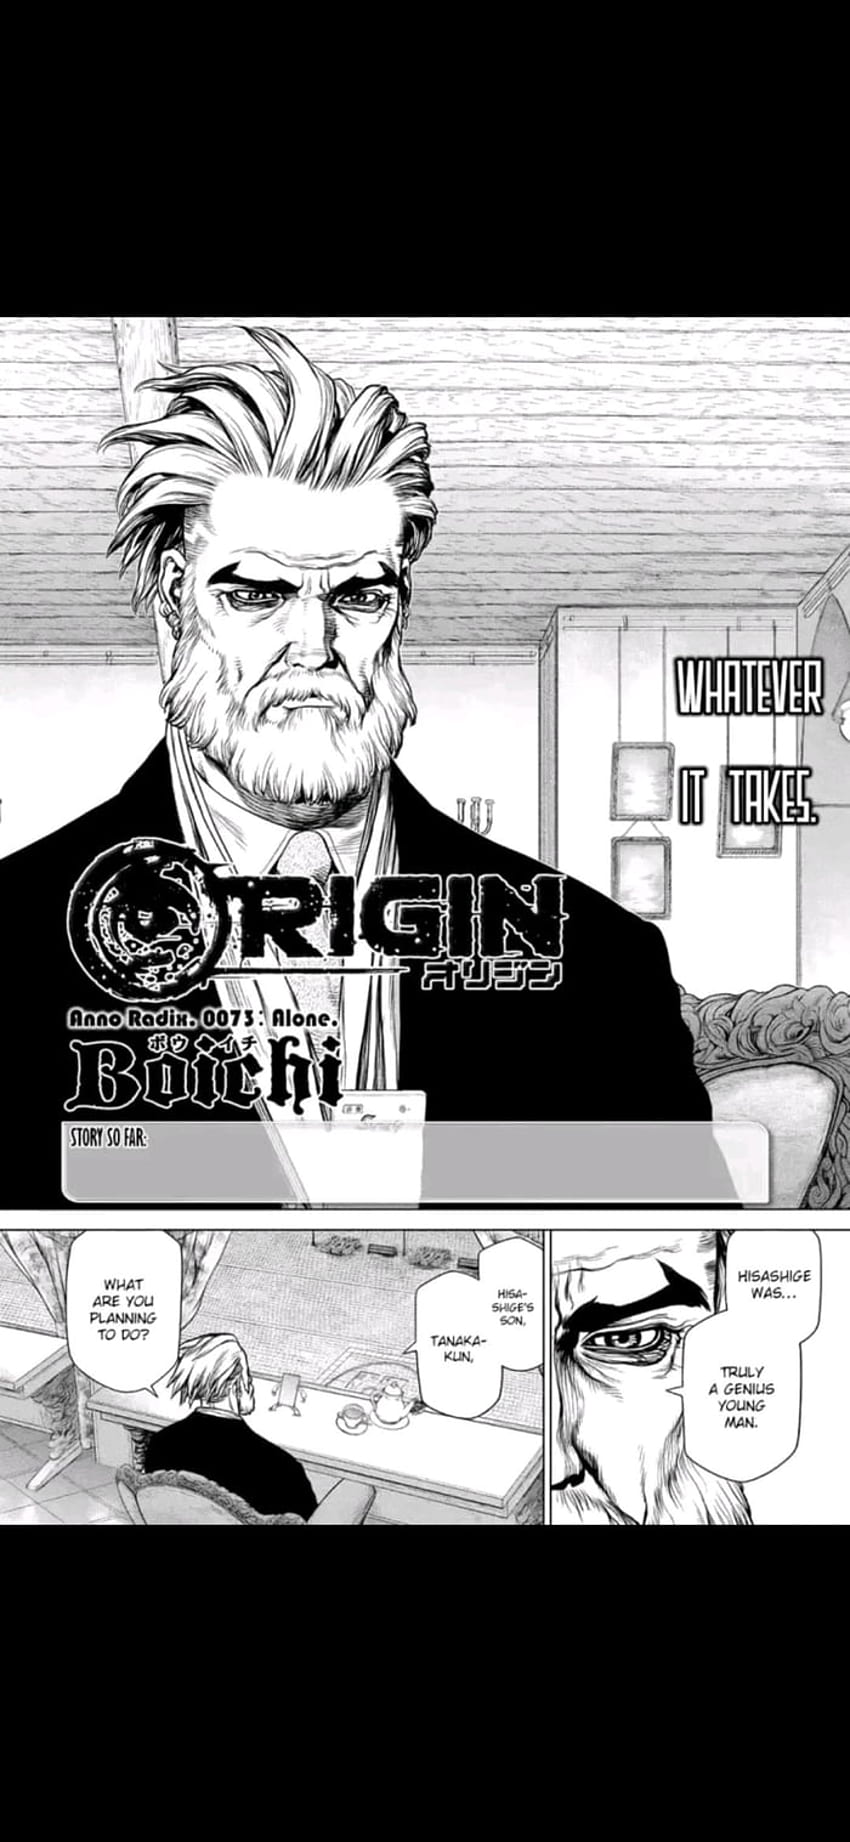 I Was Reading 'Origin' From Boichi And Saw That He Used Ken Again From 'Sun Ken Rock'. This Gave Me A Nostalgic Feeling. O Just Want To Share With You Guys HD phone wallpaper